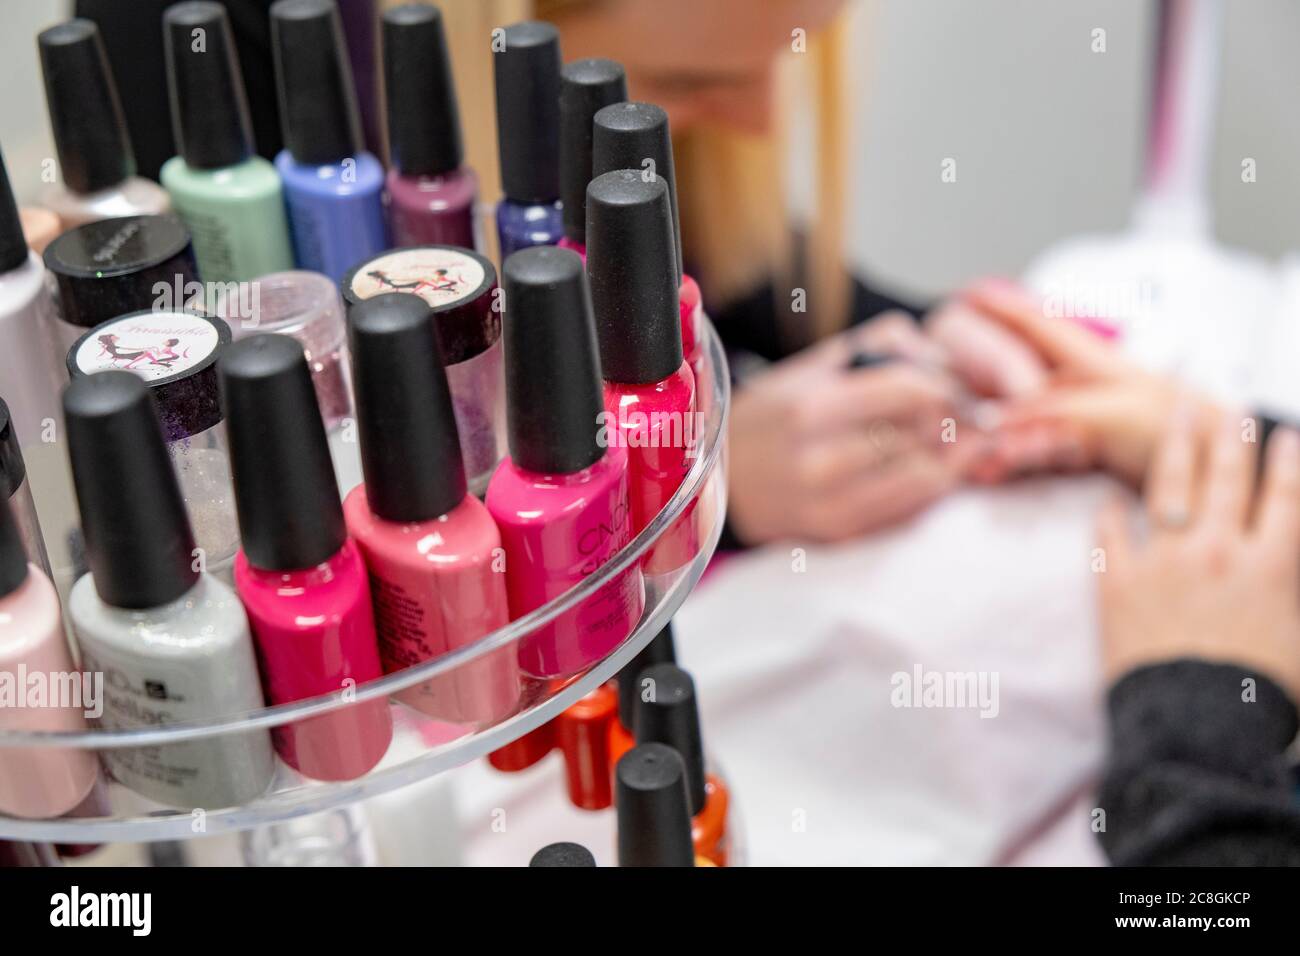 Nails getting painted by beautician Stock Photo